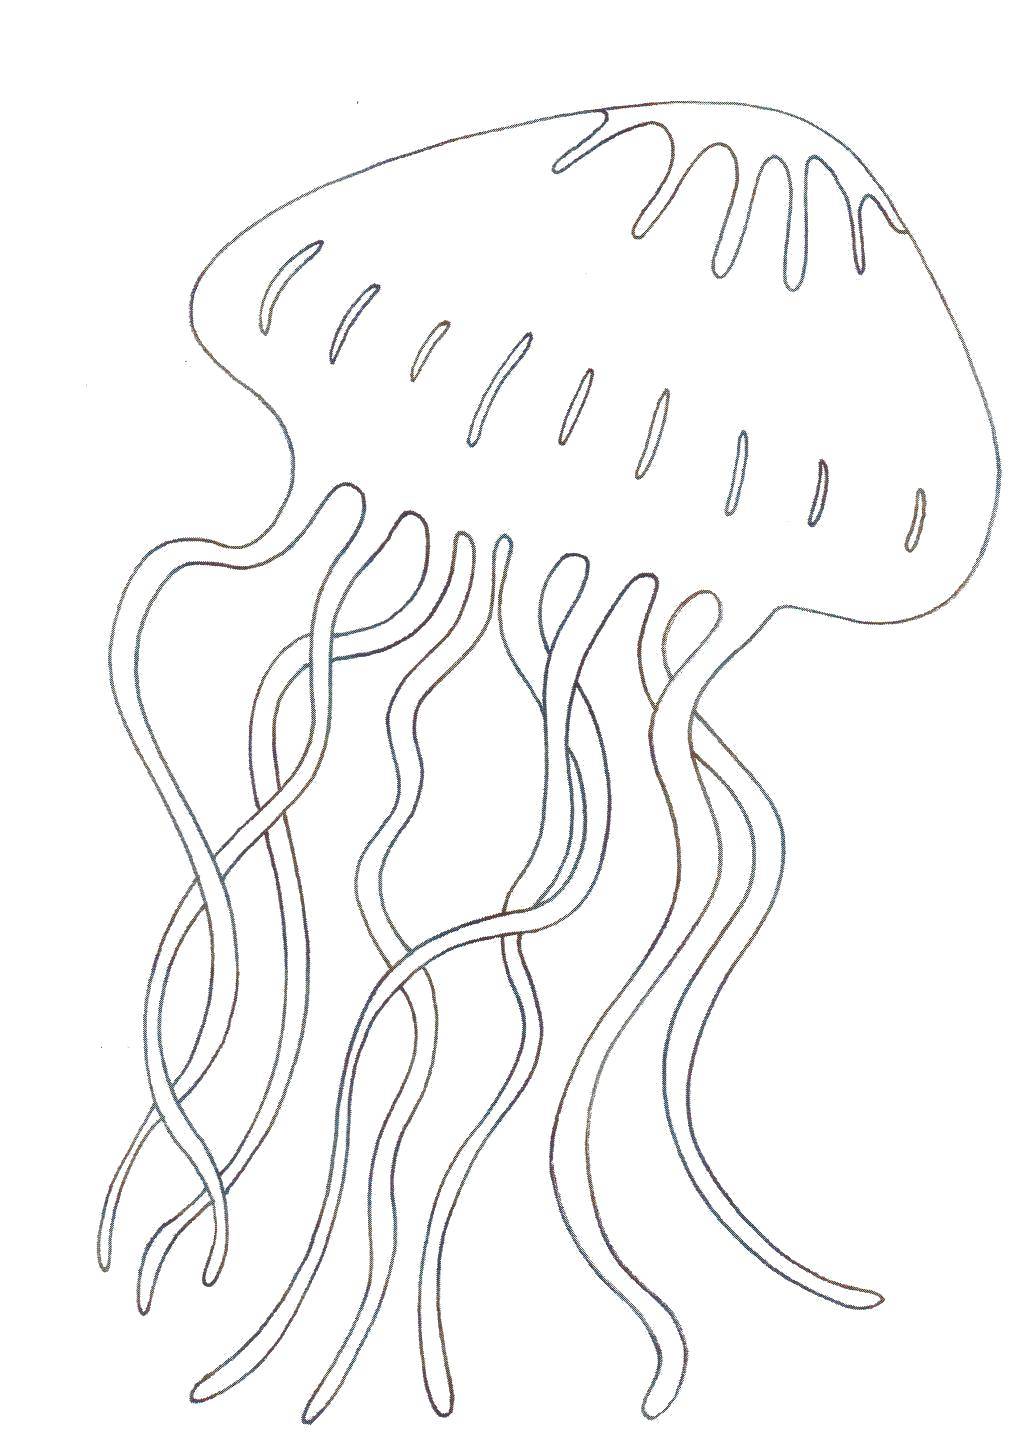 Coloring Jellyfish in the ocean. Category marine. Tags:  The ocean, jellyfish.